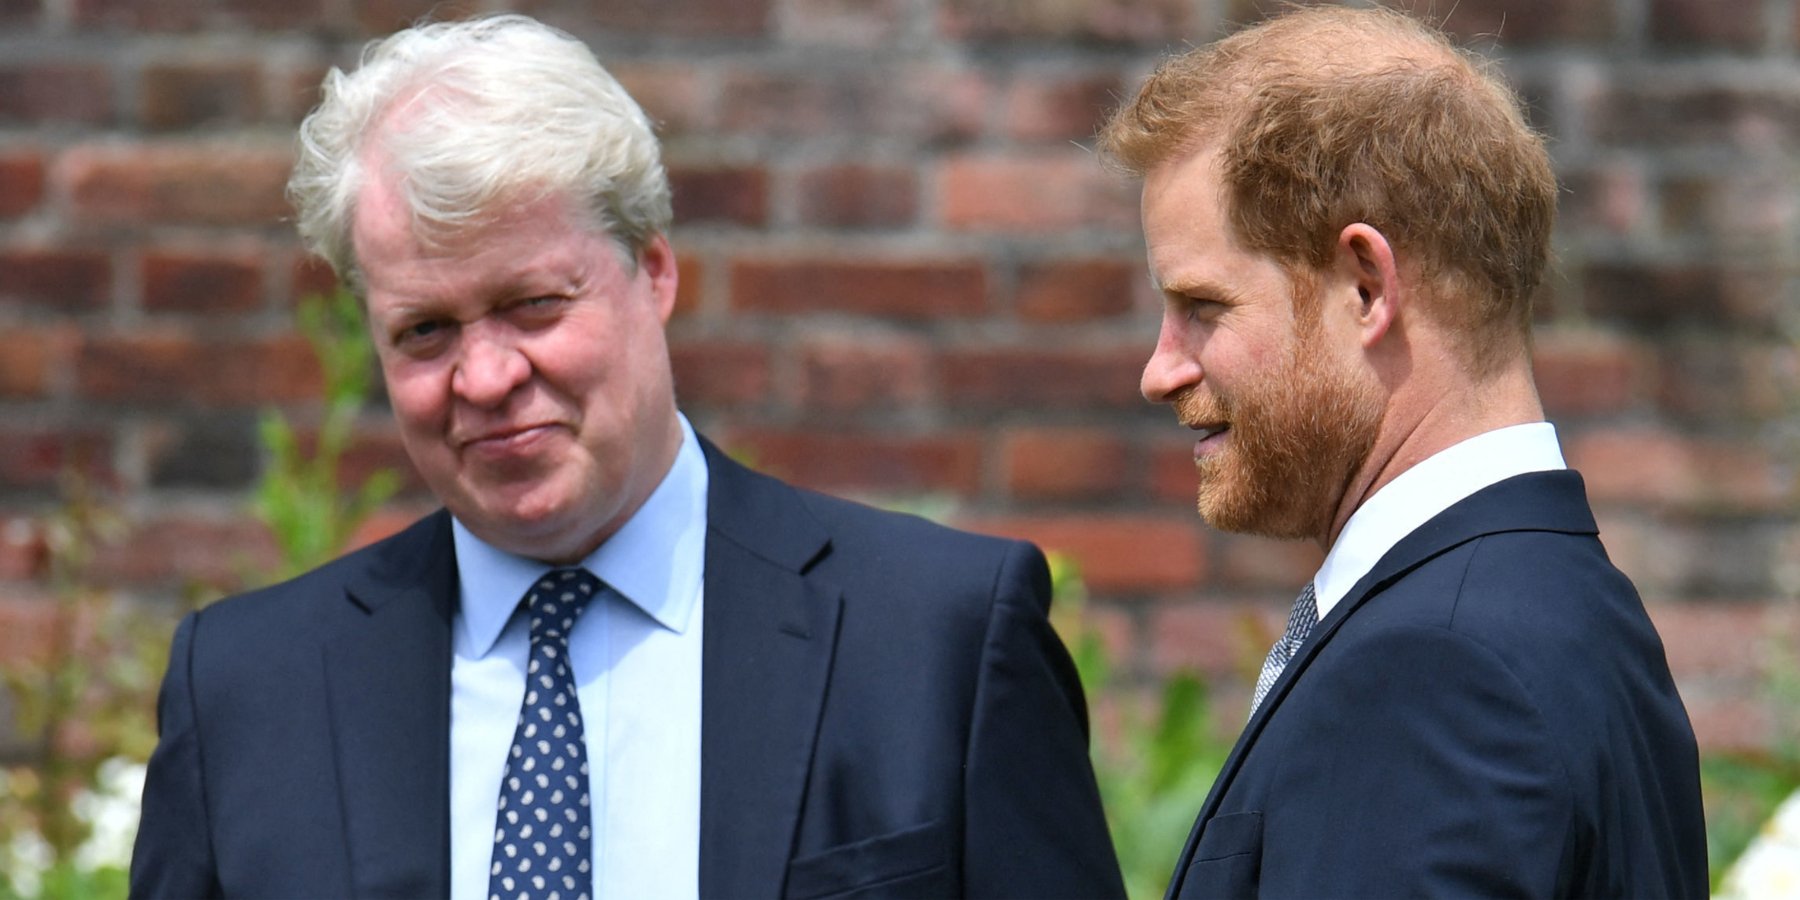 Charles Spencer and Prince Harry at unveiling of a statue of their mother, Princess Diana at The Sunken Garden in Kensington Palace, London on July 1, 2021.